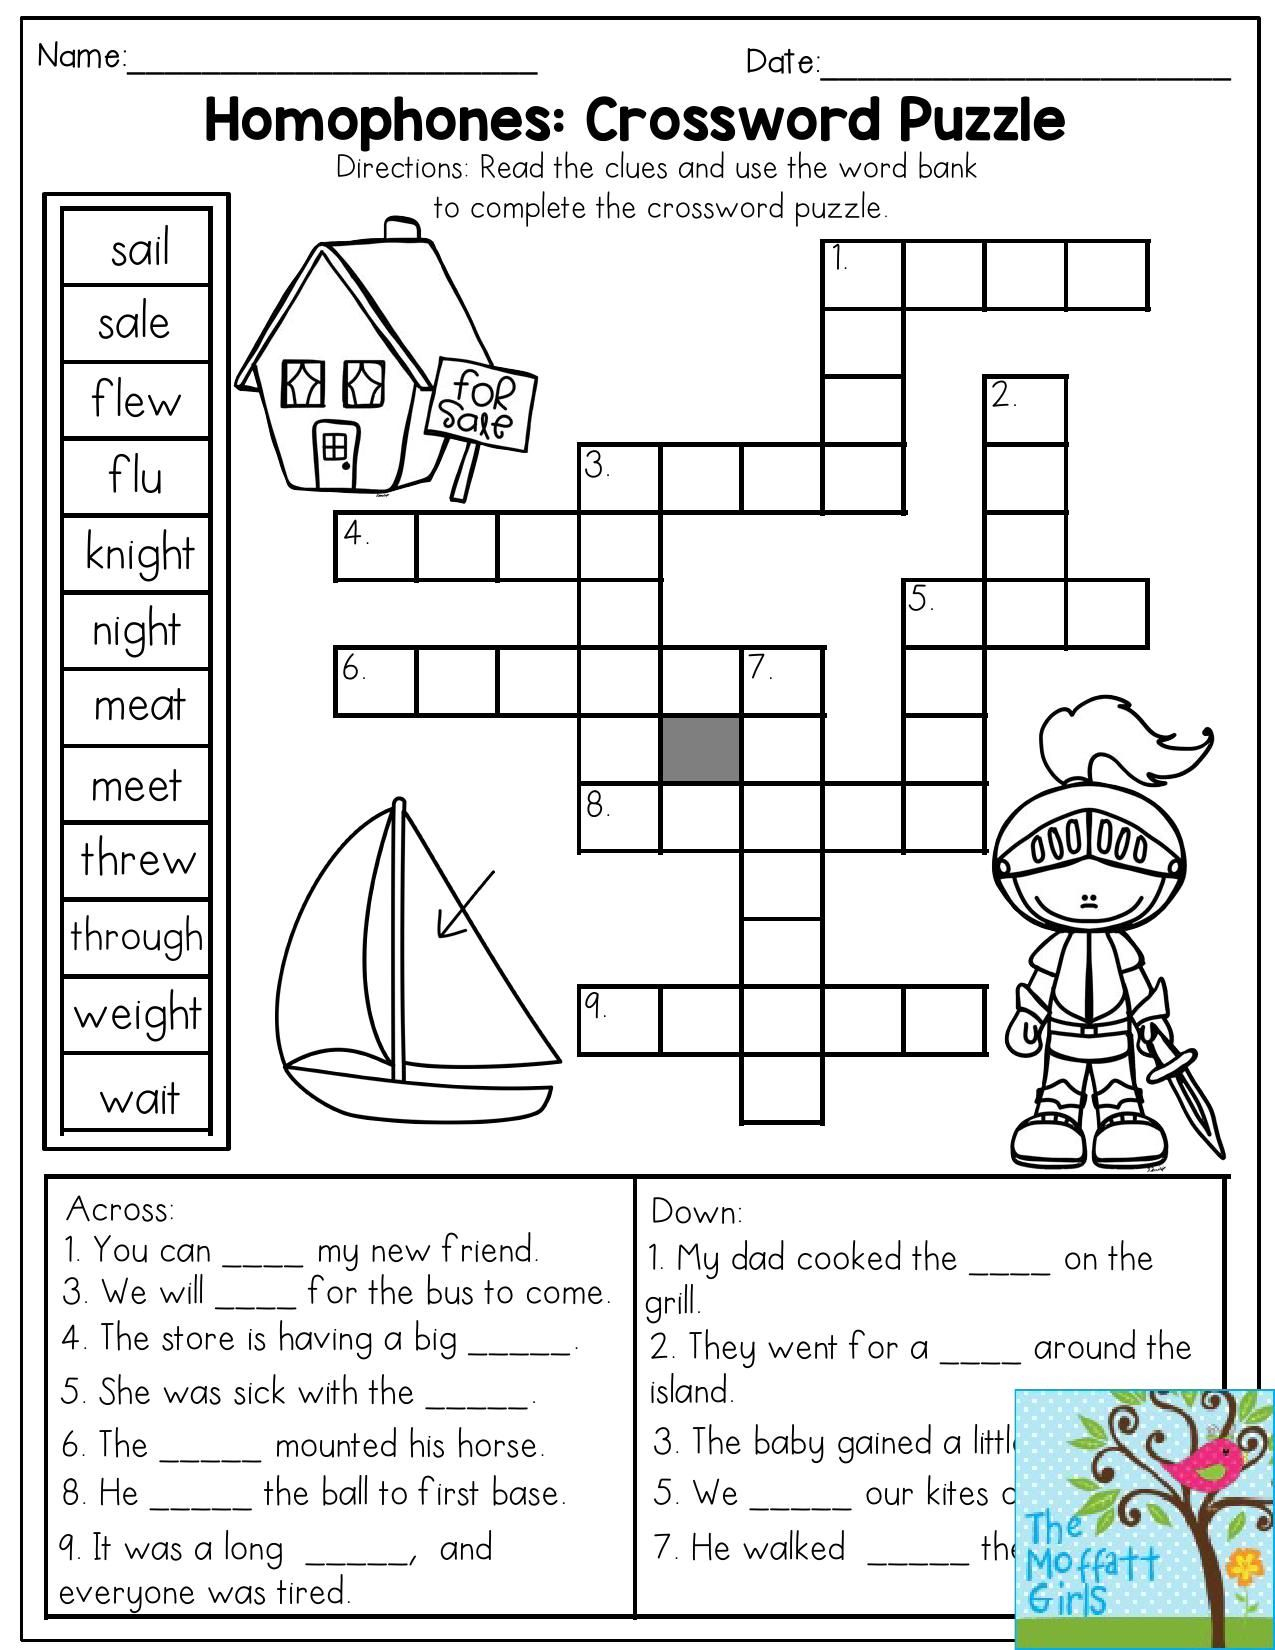 Homophones: Crossword Puzzle- Read The Clues And Use The Word Bank - 4Th Grade Printable Crossword Puzzles